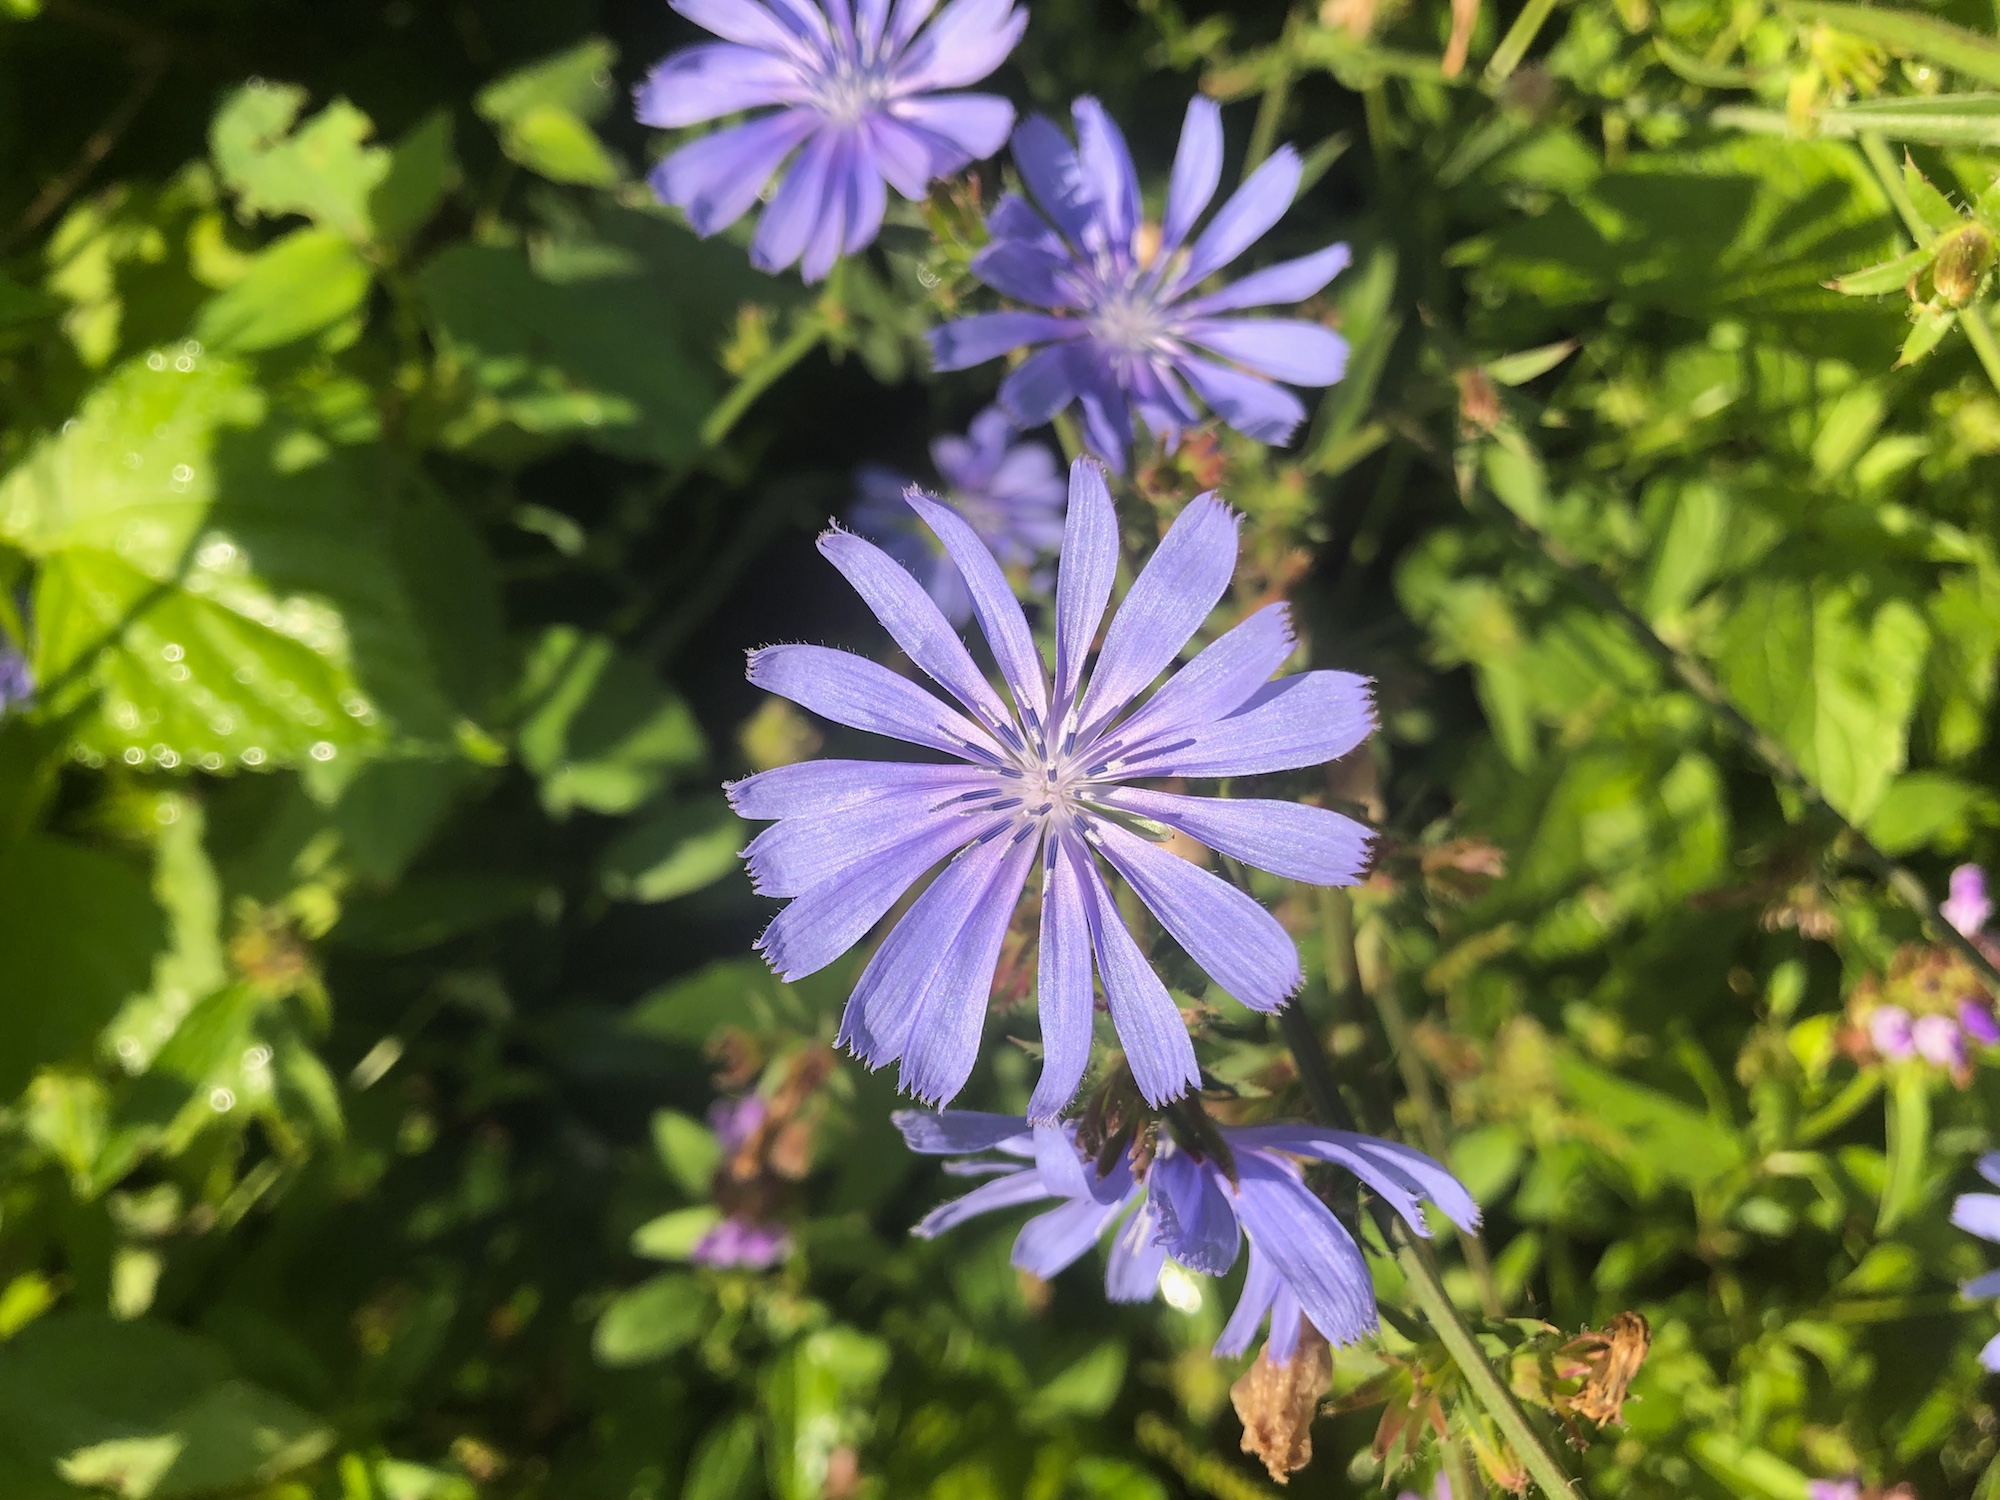 Chicory in Marion Dunn Prairie in Madison, Wisconsin on July 31, 2019.